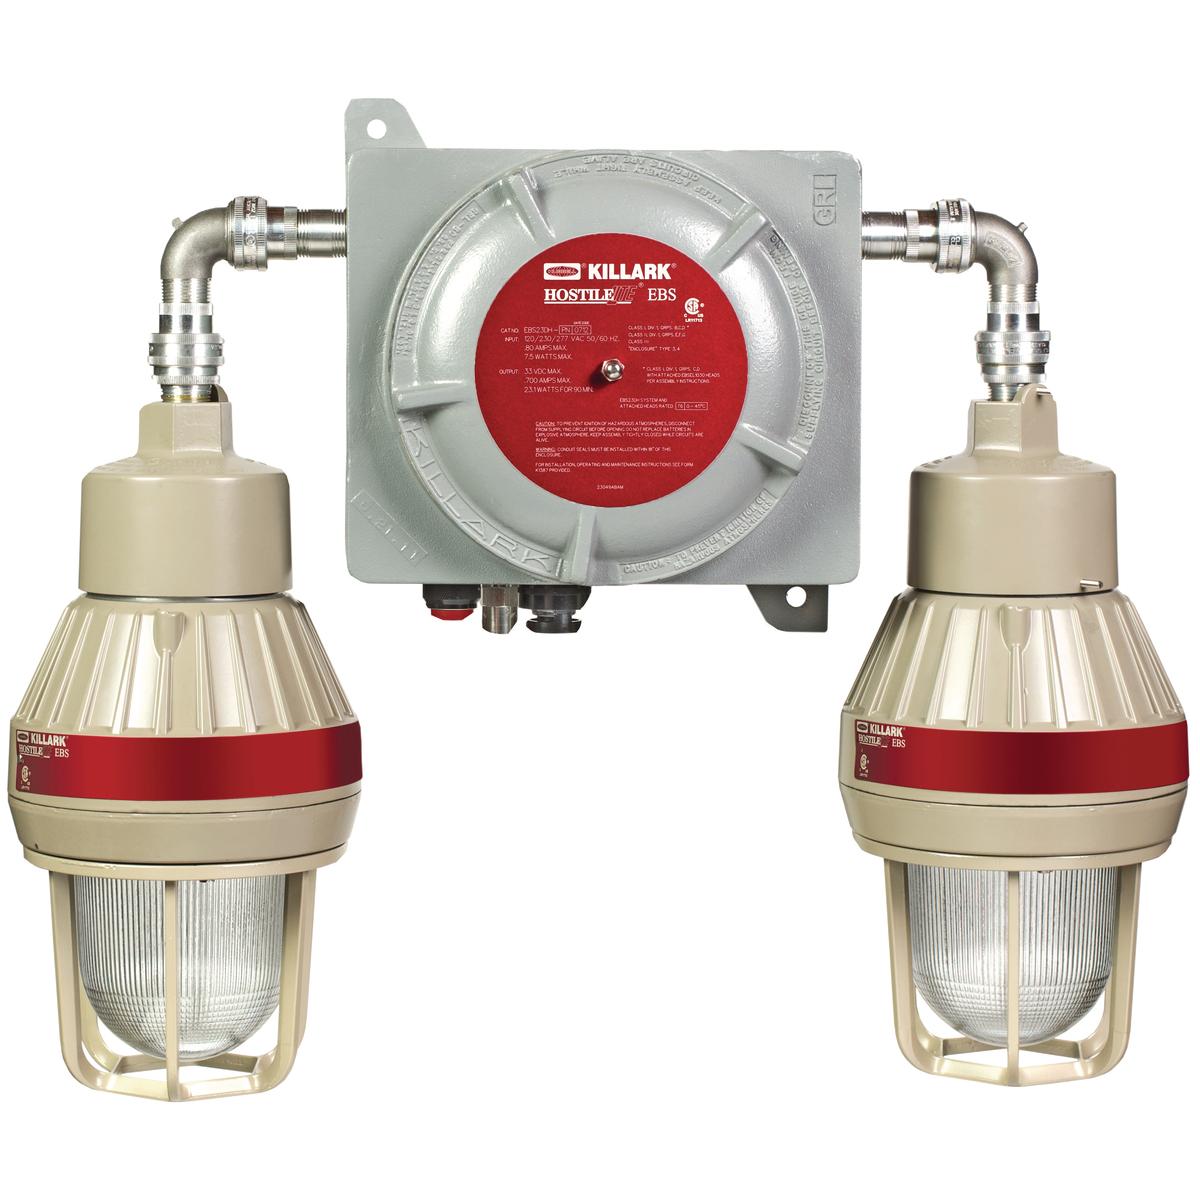 Hubbell EBS23DH-PTBG The EBS Series Explosion Proof LED Emergency Battery Backup System is designed for egress or anti-panic applications. This fixture is made with a cast copper-free aluminum housing and fixture heads that are powder epoxy powder coat painted for extra corro